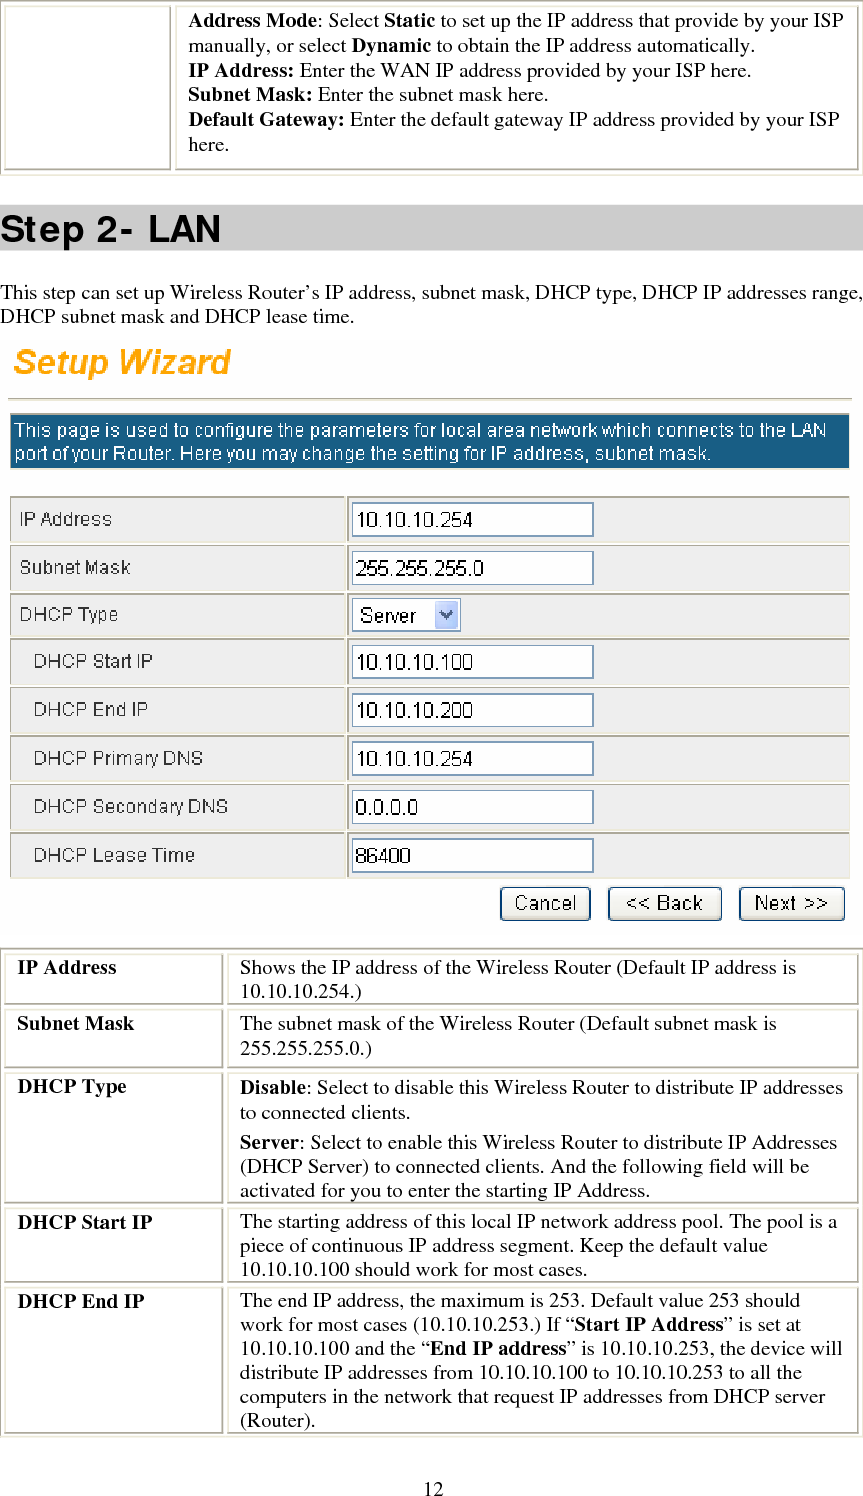   12Address Mode: Select Static to set up the IP address that provide by your ISP manually, or select Dynamic to obtain the IP address automatically. IP Address: Enter the WAN IP address provided by your ISP here. Subnet Mask: Enter the subnet mask here. Default Gateway: Enter the default gateway IP address provided by your ISP here. Step 2- LAN This step can set up Wireless Router’s IP address, subnet mask, DHCP type, DHCP IP addresses range, DHCP subnet mask and DHCP lease time.  IP Address  Shows the IP address of the Wireless Router (Default IP address is 10.10.10.254.) Subnet Mask  The subnet mask of the Wireless Router (Default subnet mask is 255.255.255.0.) DHCP Type  Disable: Select to disable this Wireless Router to distribute IP addresses to connected clients. Server: Select to enable this Wireless Router to distribute IP Addresses (DHCP Server) to connected clients. And the following field will be activated for you to enter the starting IP Address. DHCP Start IP  The starting address of this local IP network address pool. The pool is a piece of continuous IP address segment. Keep the default value 10.10.10.100 should work for most cases. DHCP End IP  The end IP address, the maximum is 253. Default value 253 should work for most cases (10.10.10.253.) If “Start IP Address” is set at 10.10.10.100 and the “End IP address” is 10.10.10.253, the device will distribute IP addresses from 10.10.10.100 to 10.10.10.253 to all the computers in the network that request IP addresses from DHCP server (Router). 